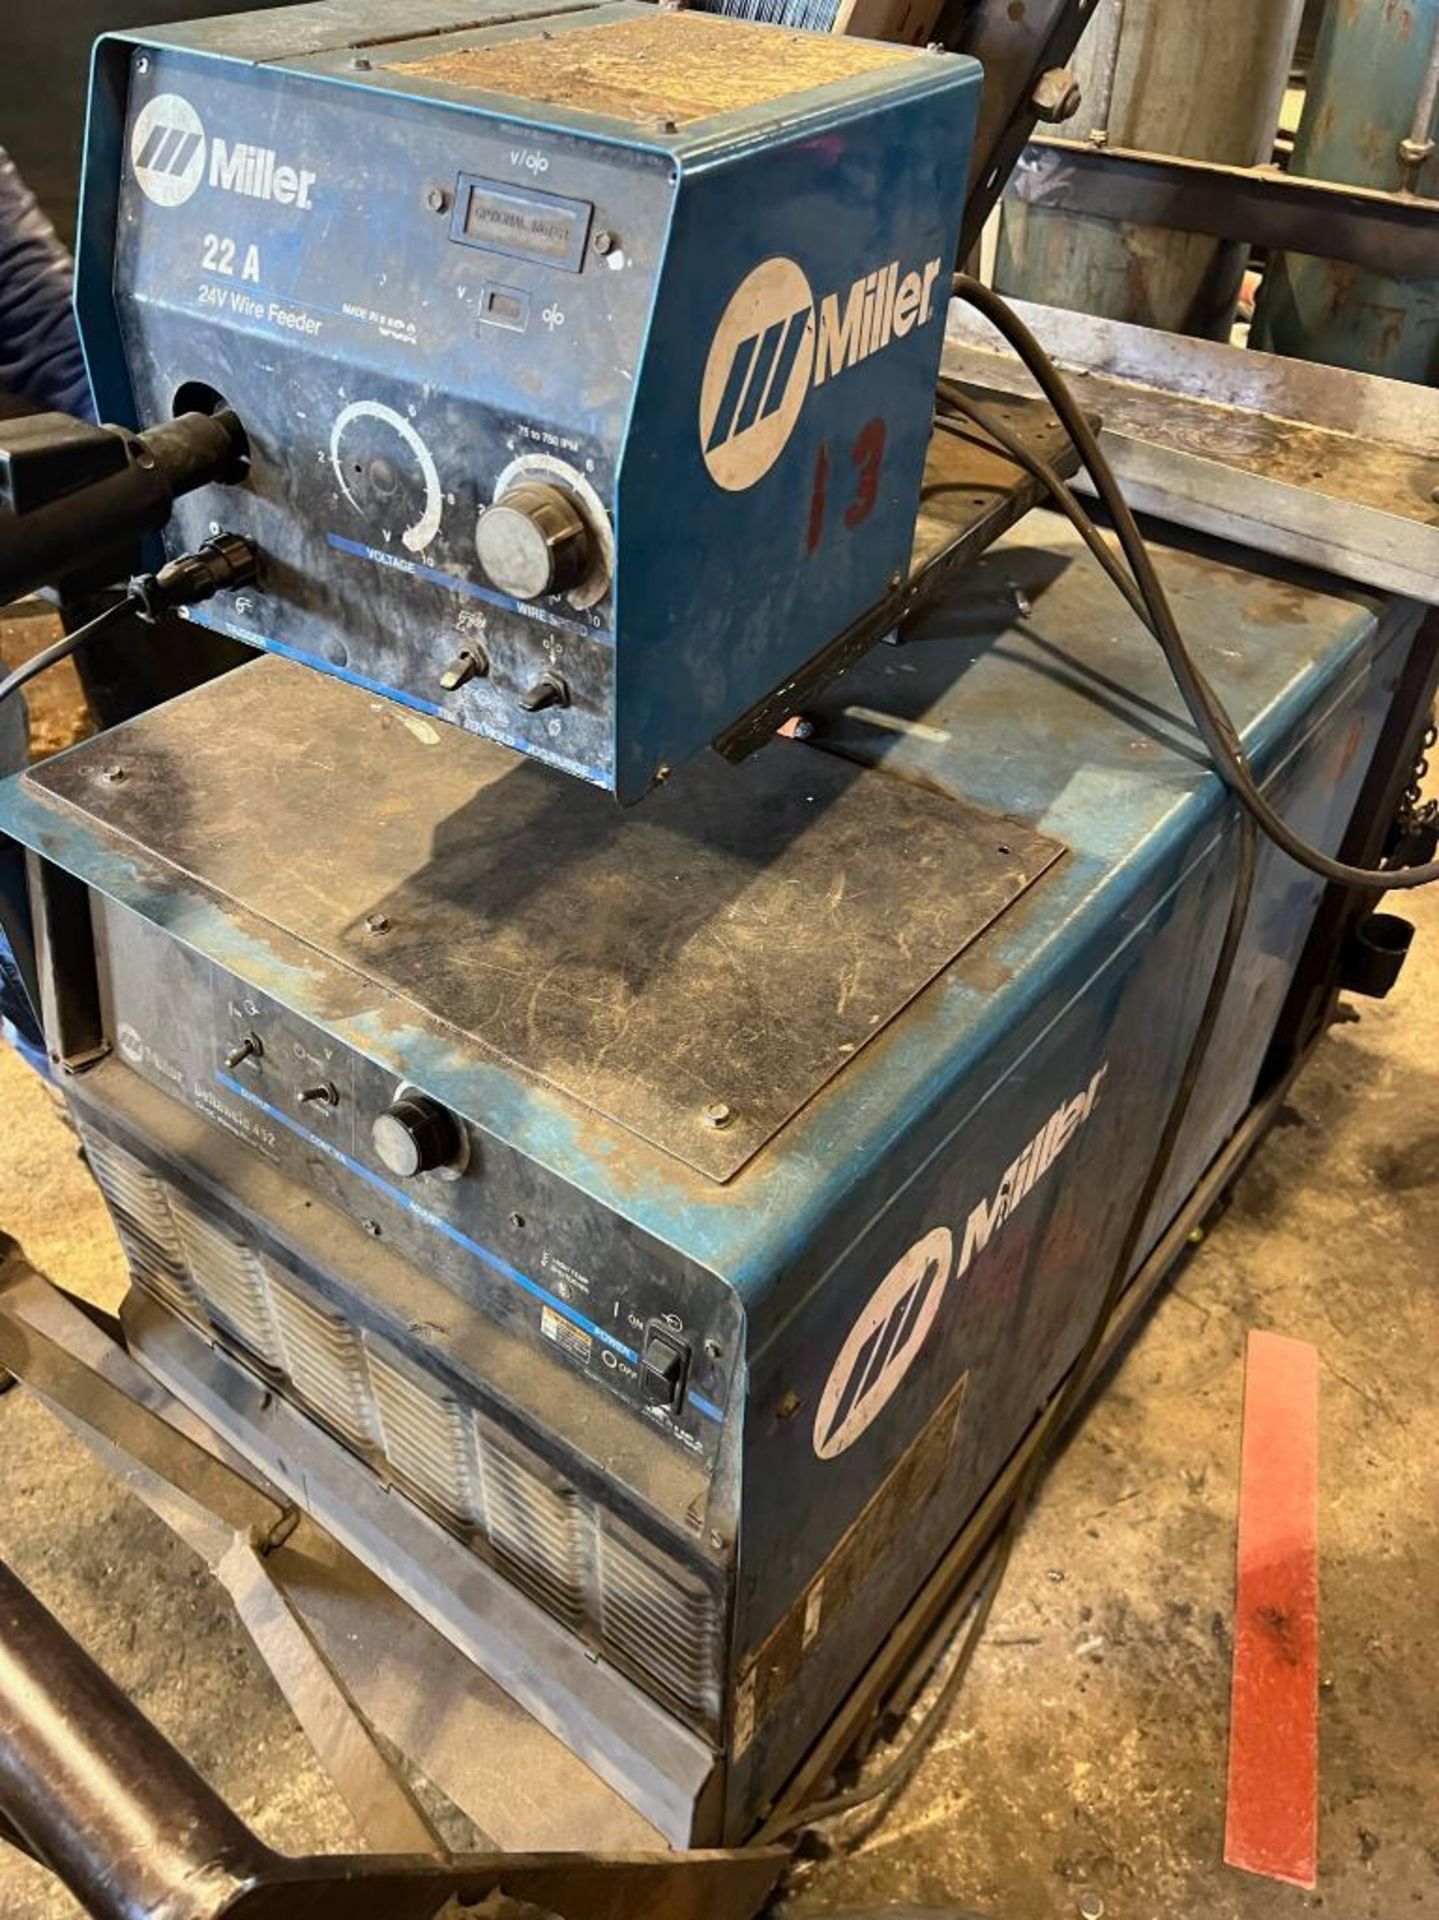 Miller Delta Weld 452 Wire Feed Welder, Sold with a Miller 24A 24V Wire Feeder, Single Phase, Bottle - Image 4 of 4